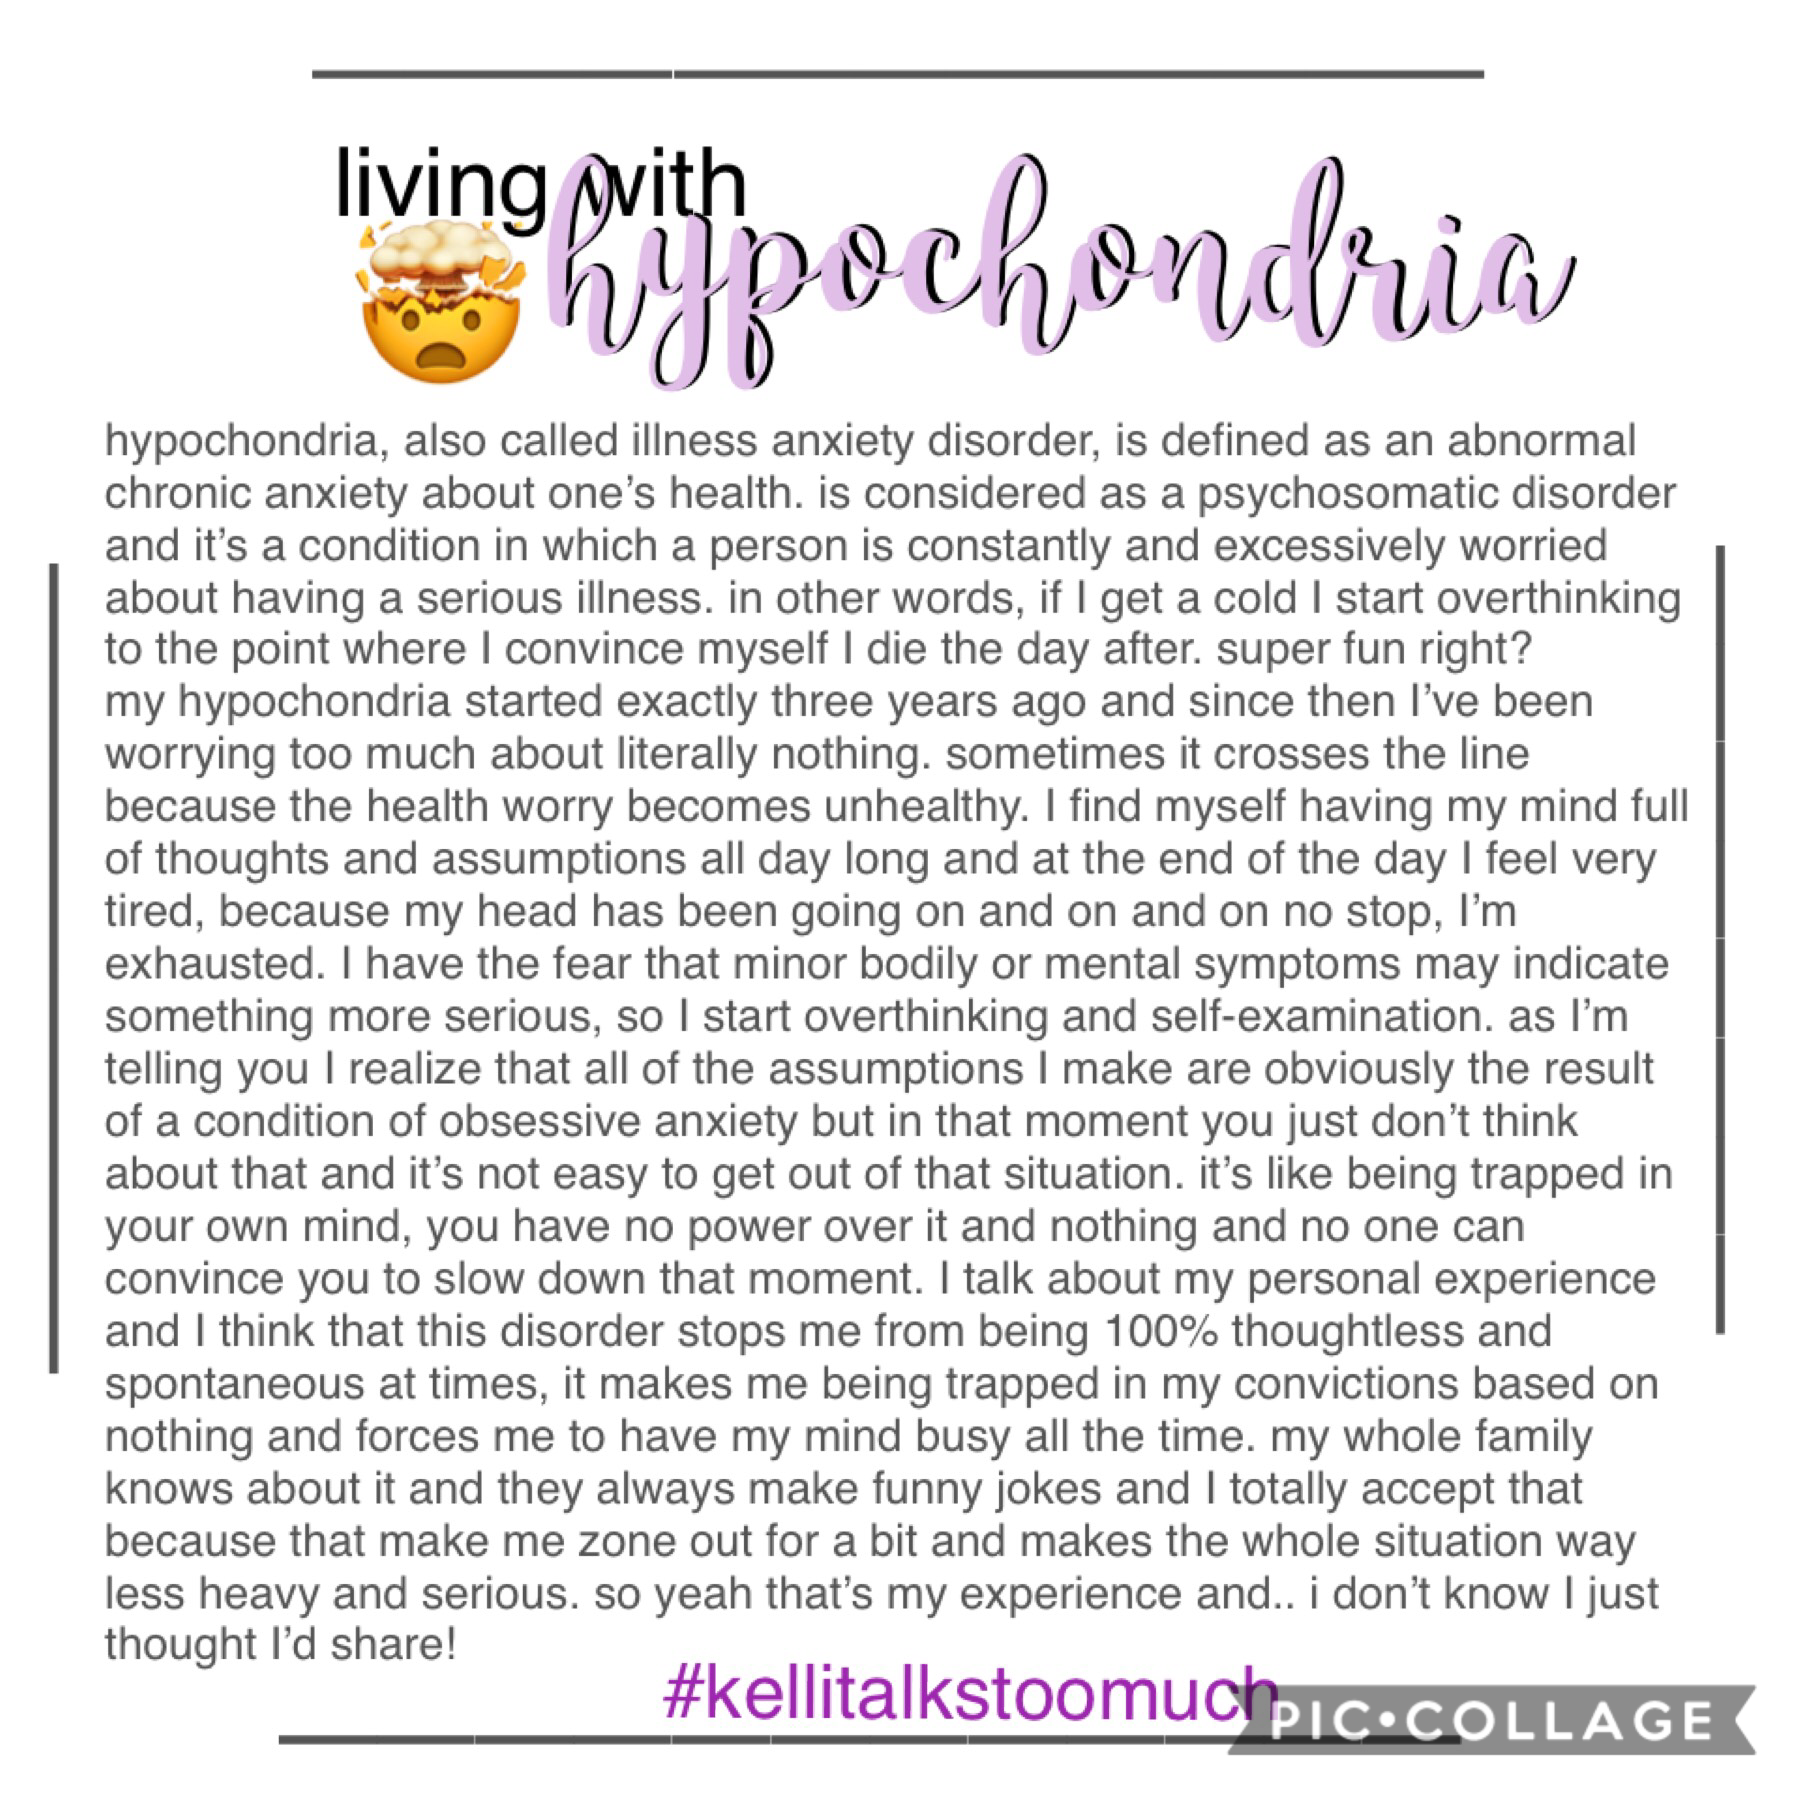 there’s so much more to say but here’s a summary of how I live with hypochondria! yay asha you get me 😎😎 
#kellitalkstoomuch